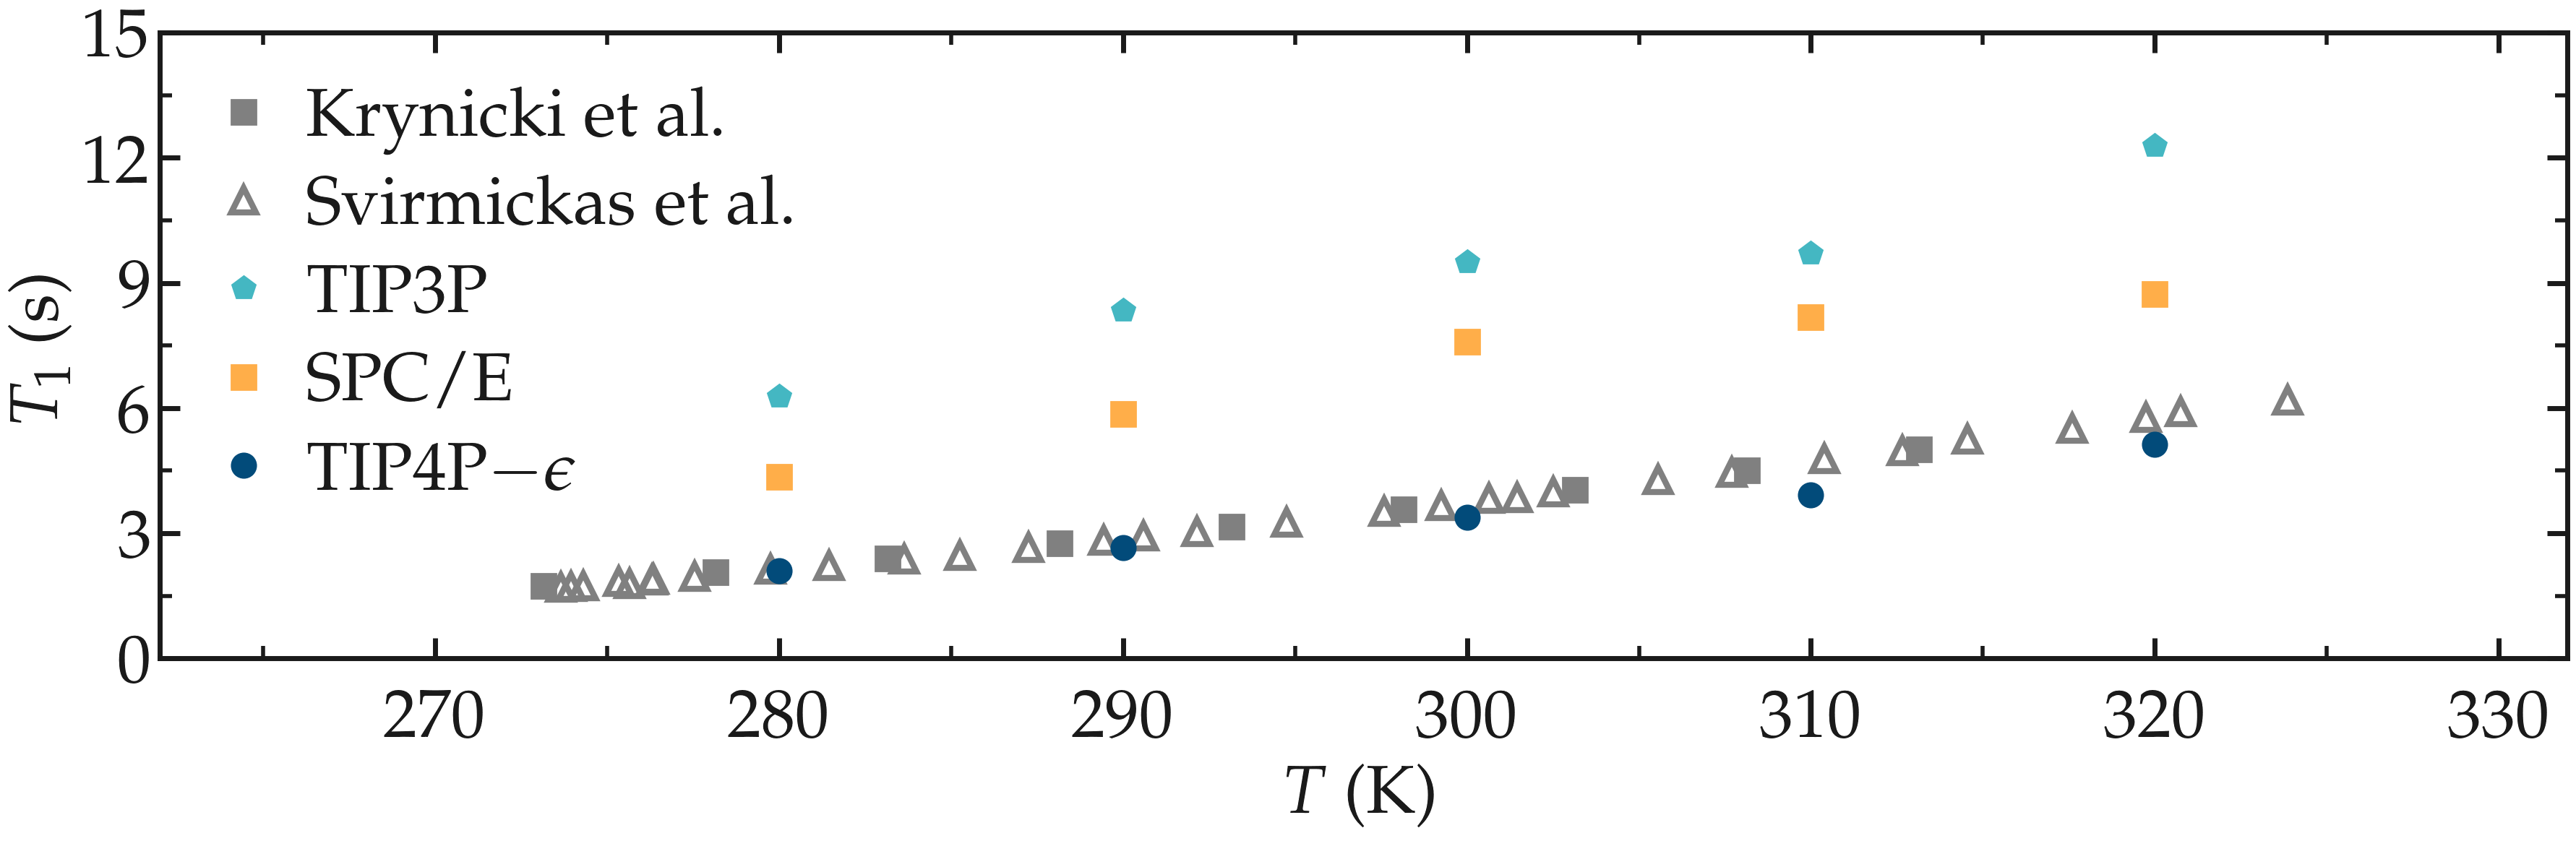 NMR results obtained from the LAMMPS simulation of water